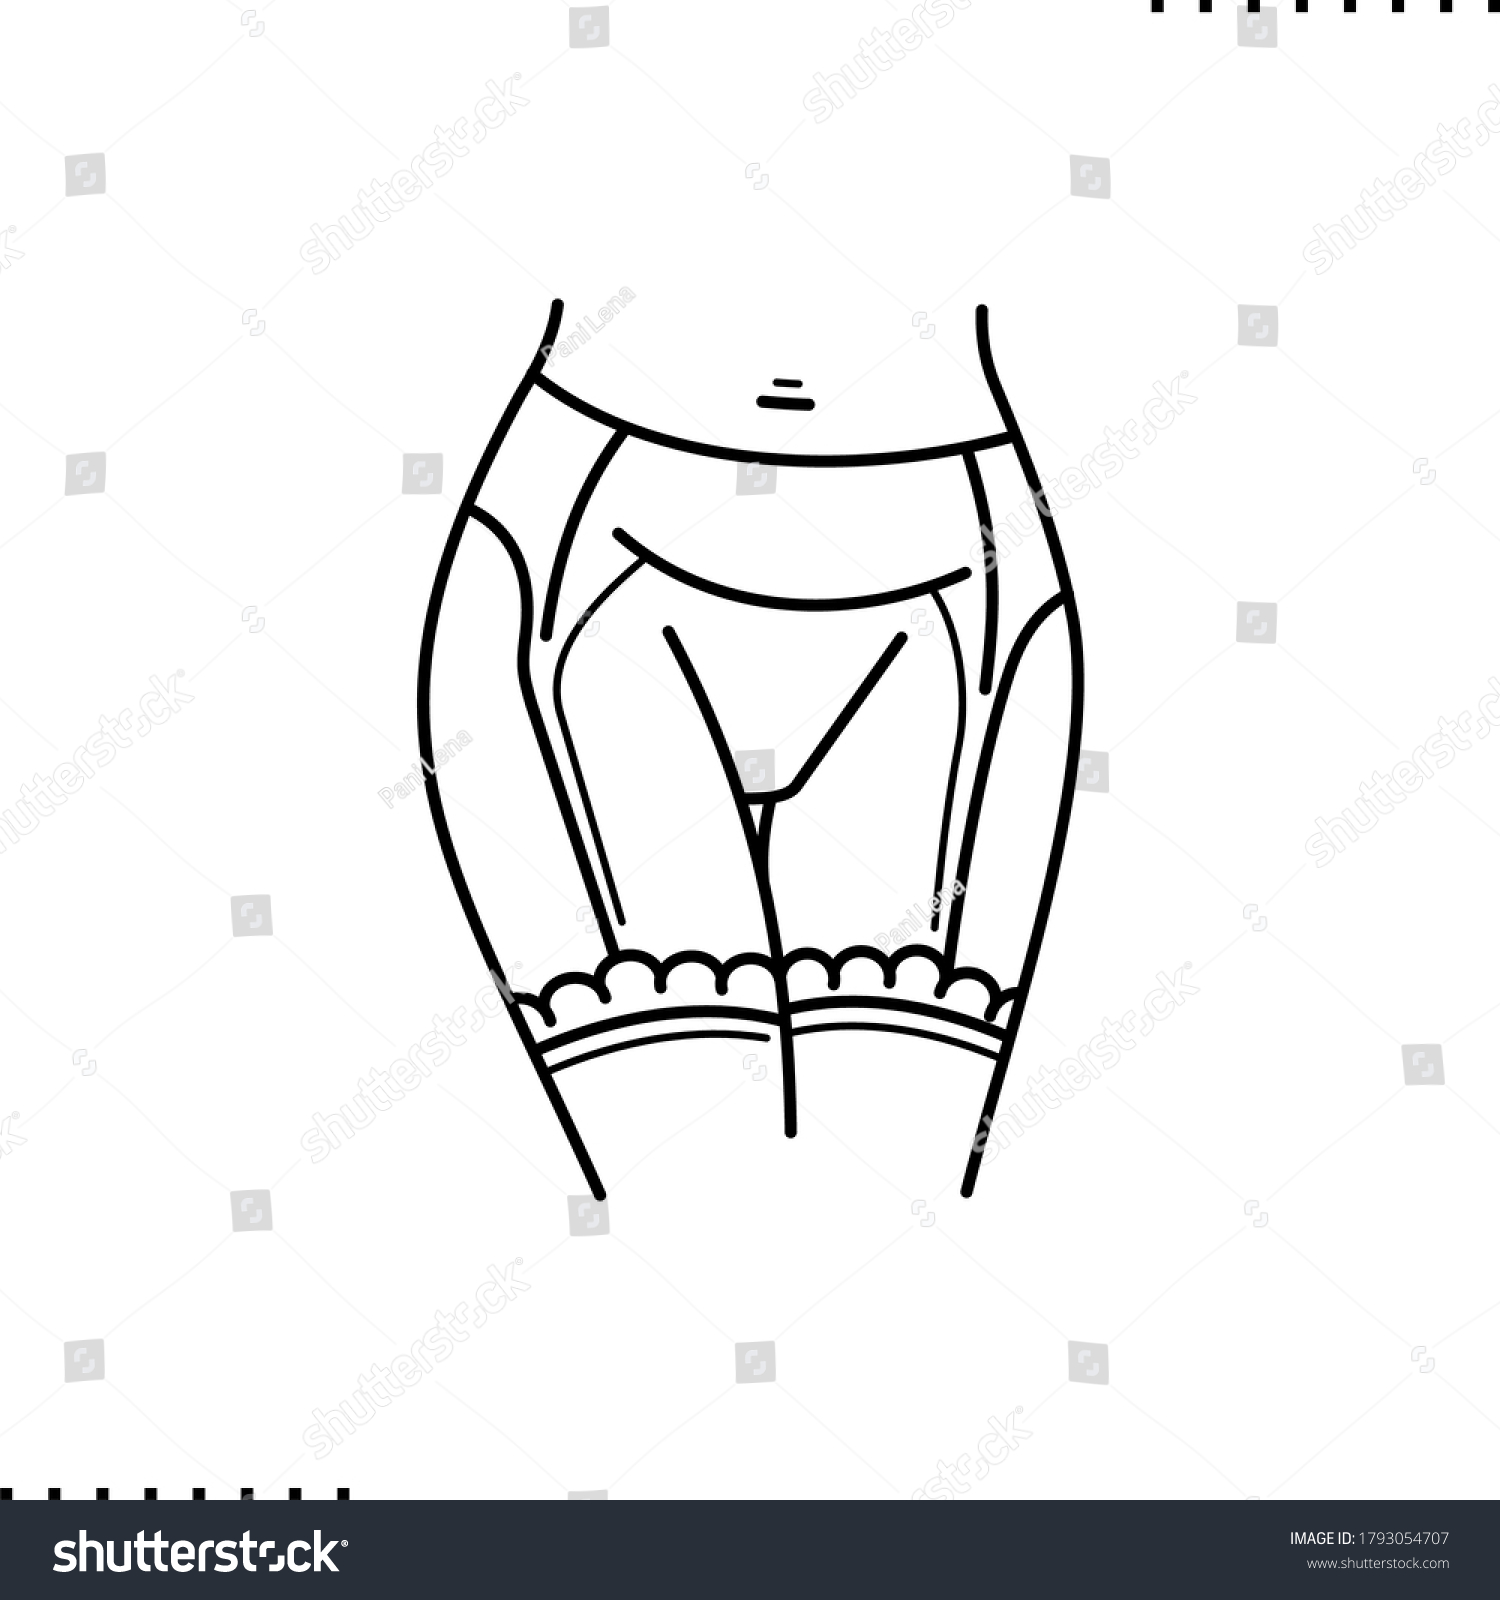 Sexy Lingerie Erotic Lace Belt Stockings Stock Vector Royalty Free 1793054707 Shutterstock 5701